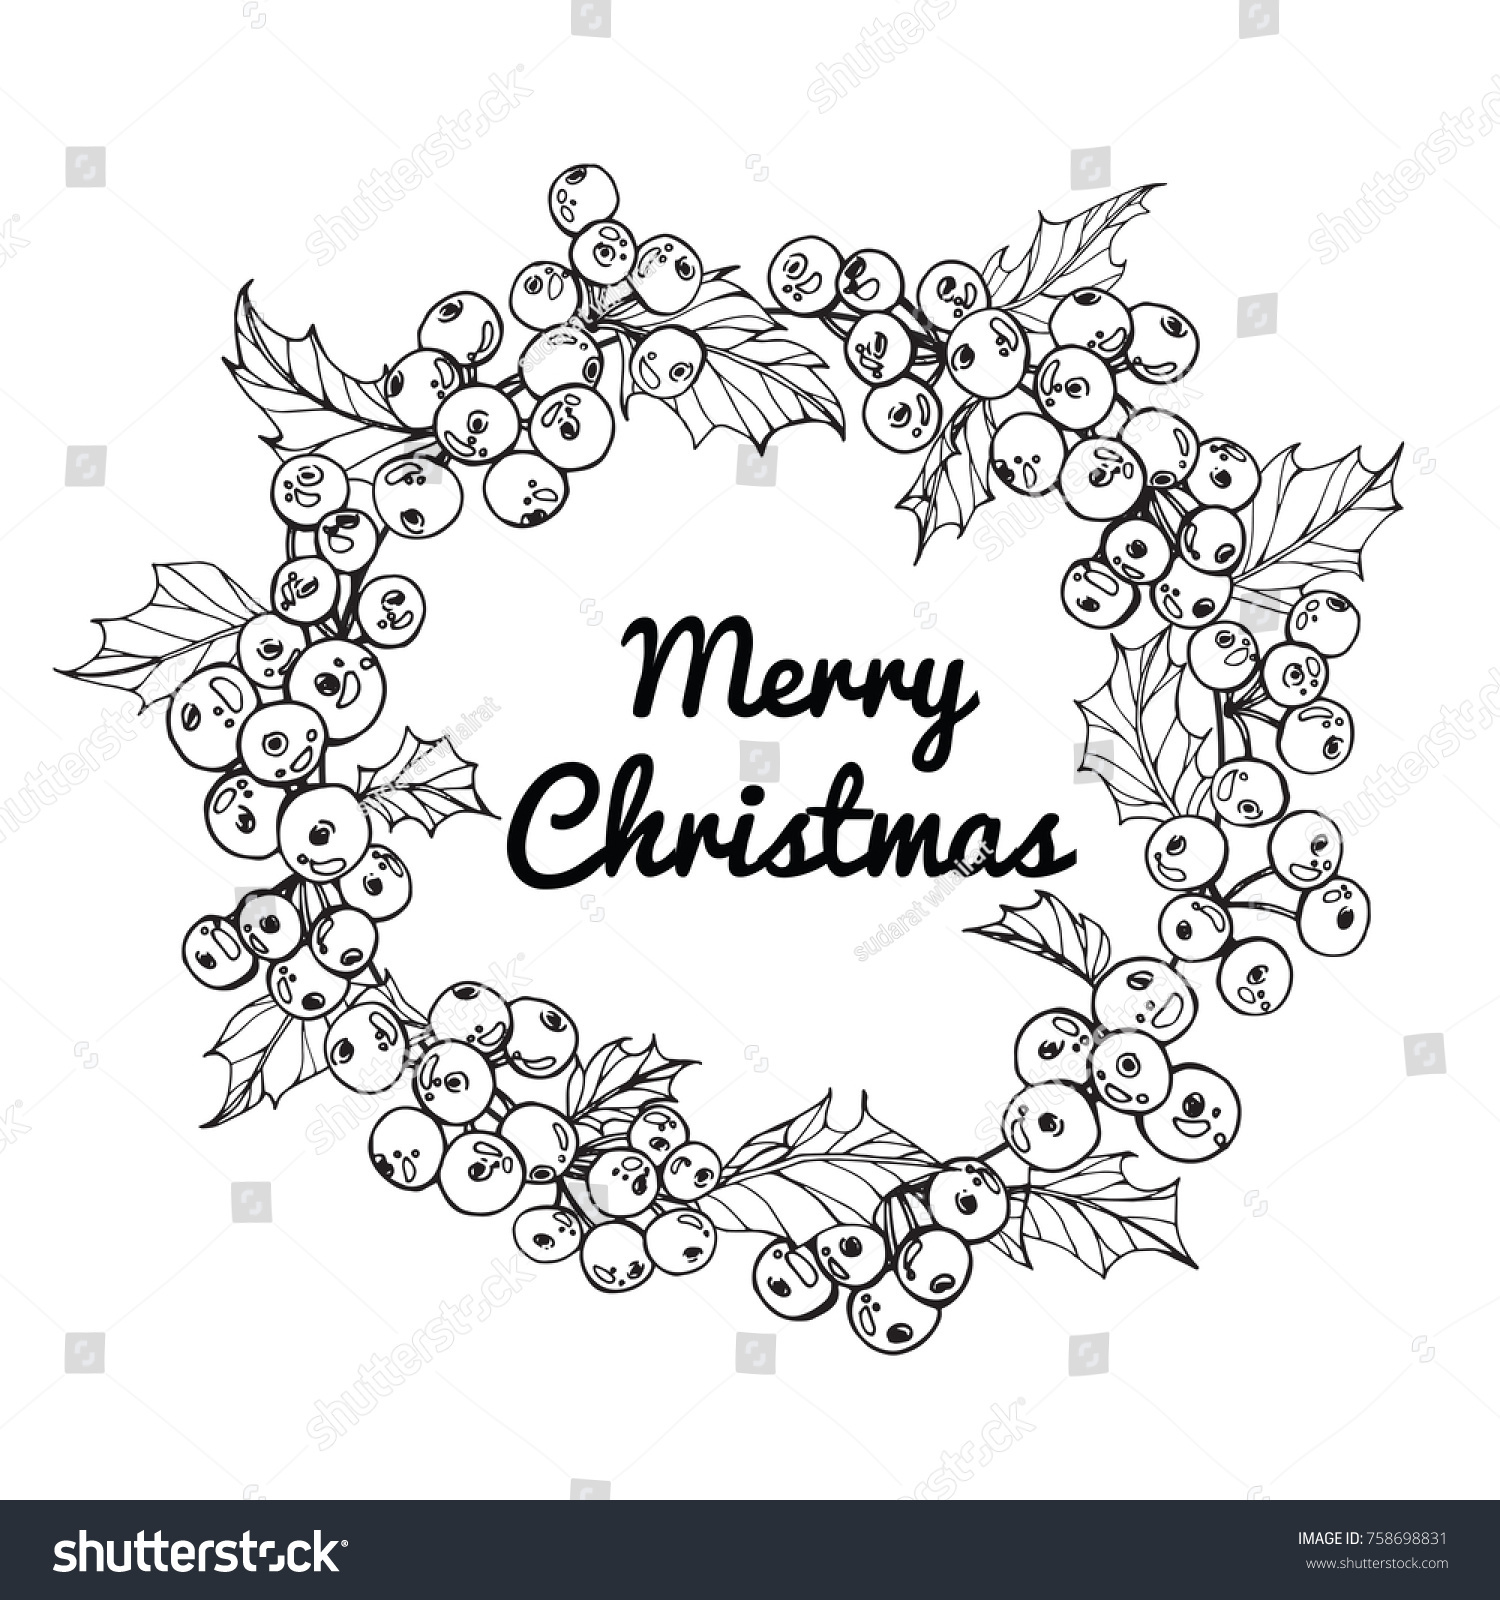 Wreath for Merry Christmas day With line art black and white illustration